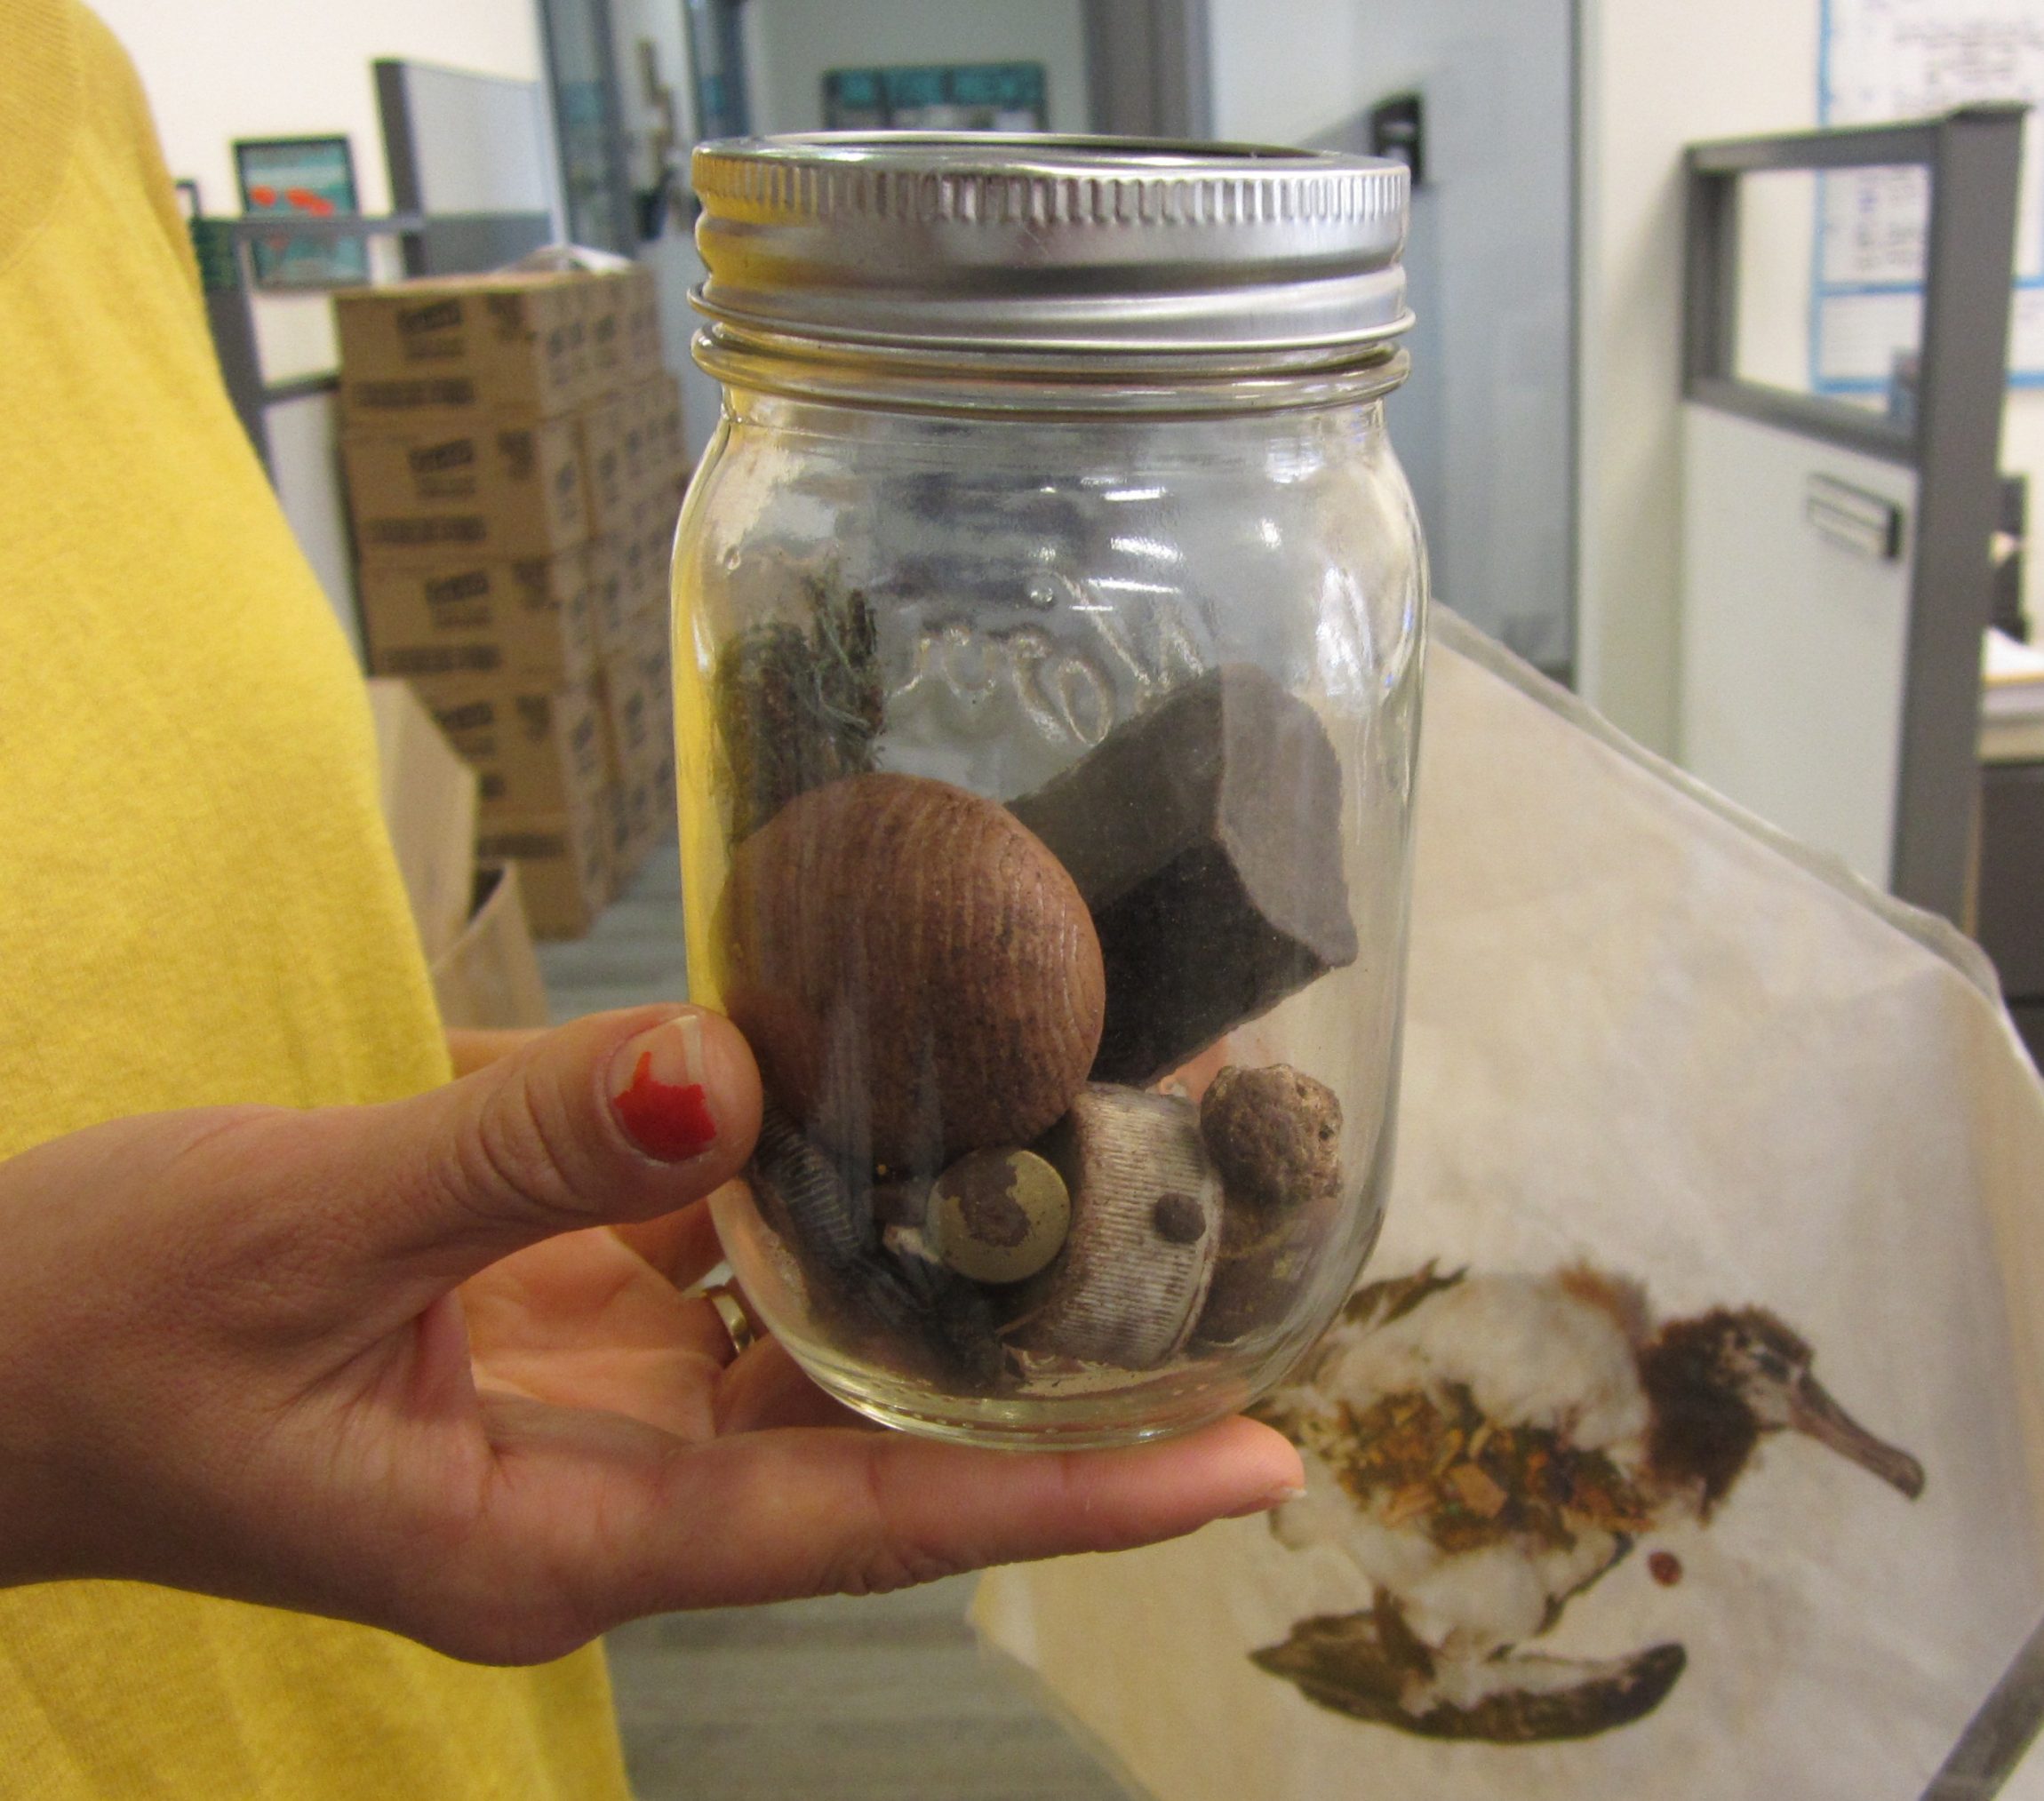 One of the many visual aids that ILACSD educators take to presentations, this contains albatross stomach contents